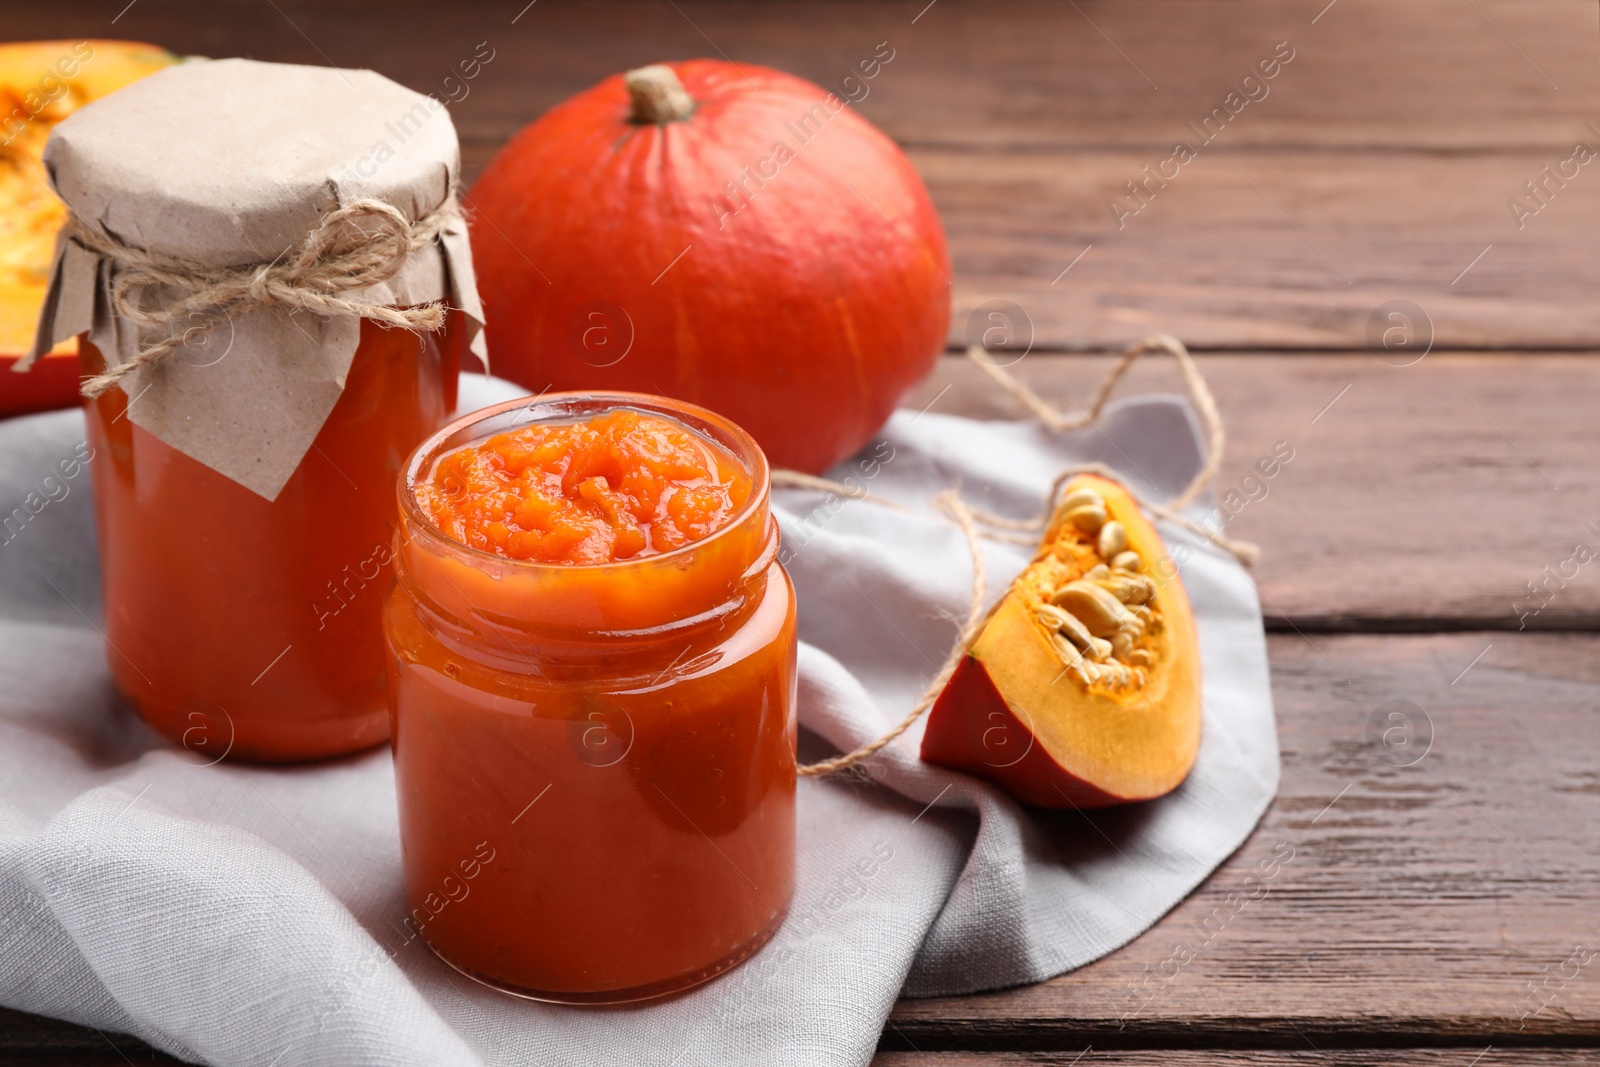 Photo of Jars of pumpkin jam and fresh pumpkins on wooden table